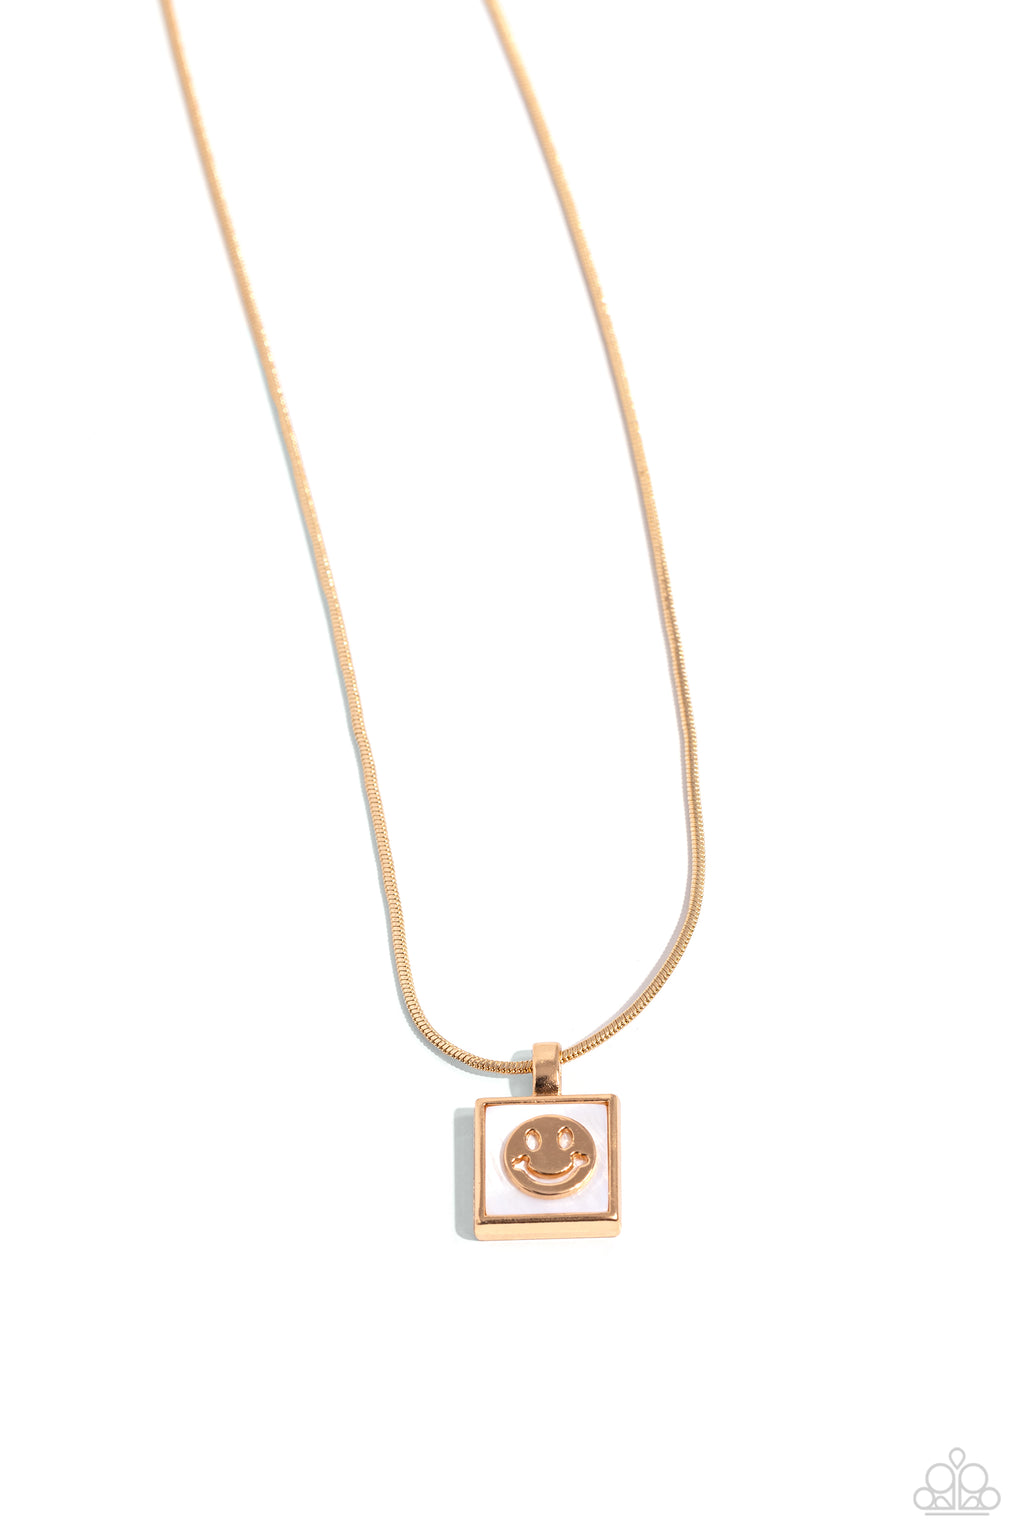 five-dollar-jewelry-smiley-season-gold-necklace-paparazzi-accessories